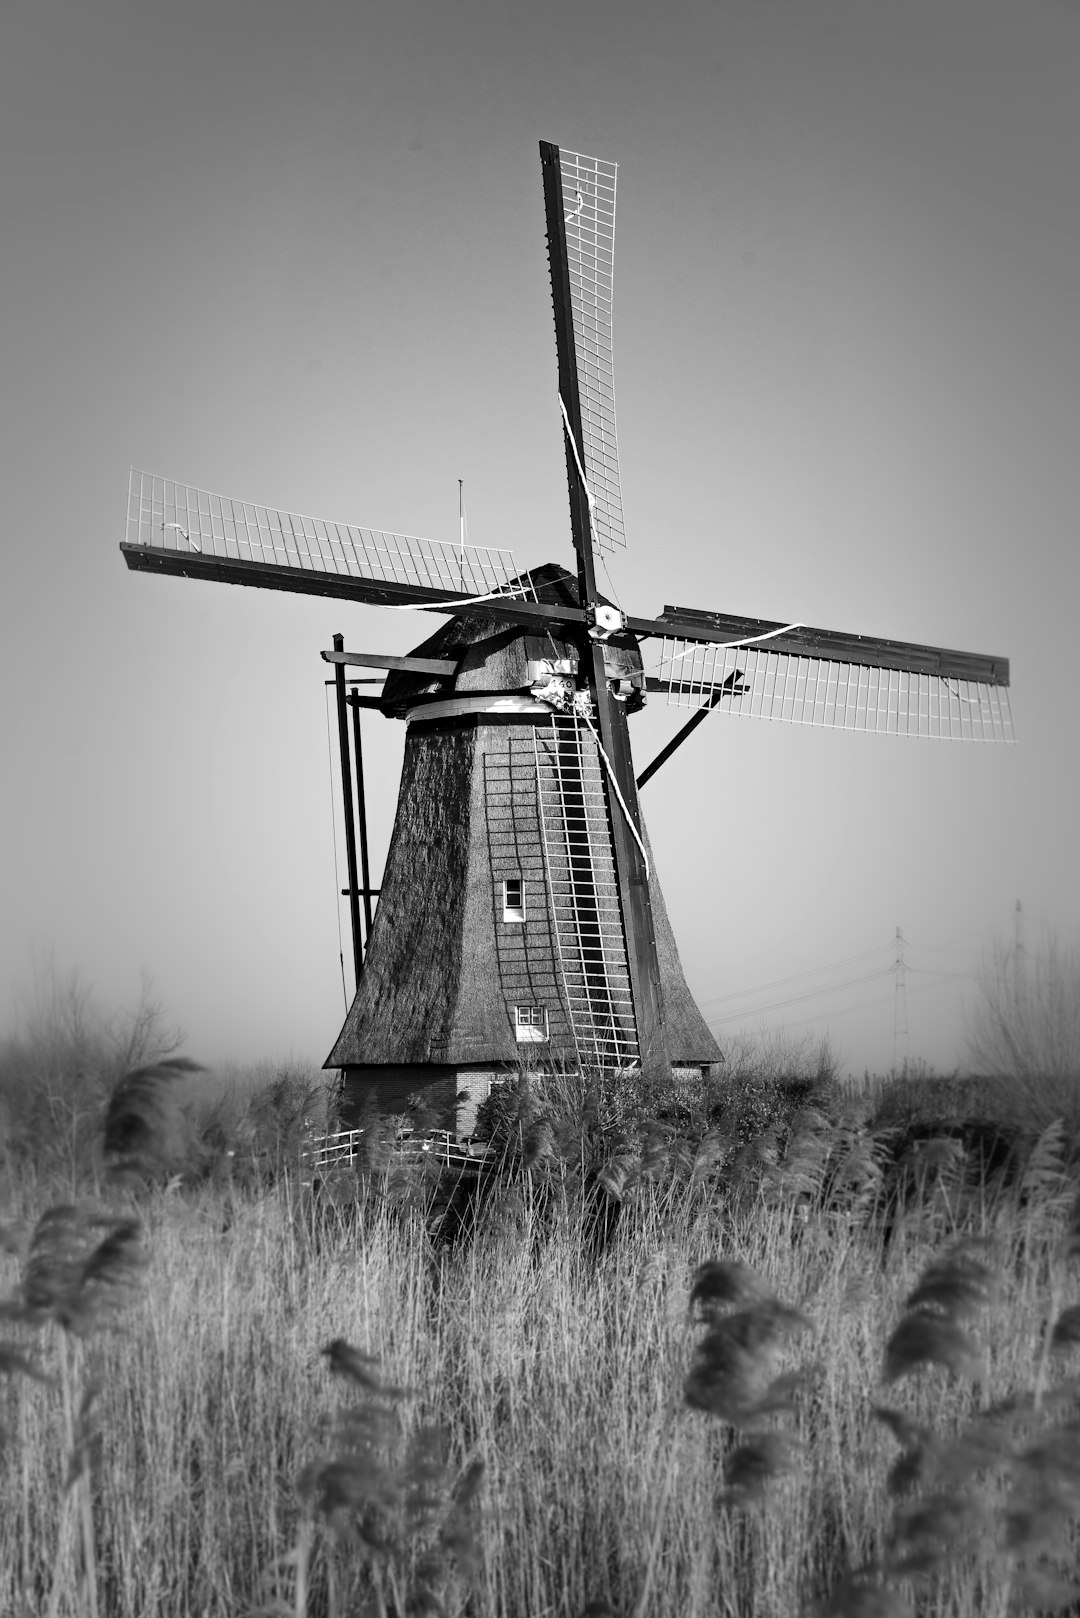 windmill in the middle of grass field